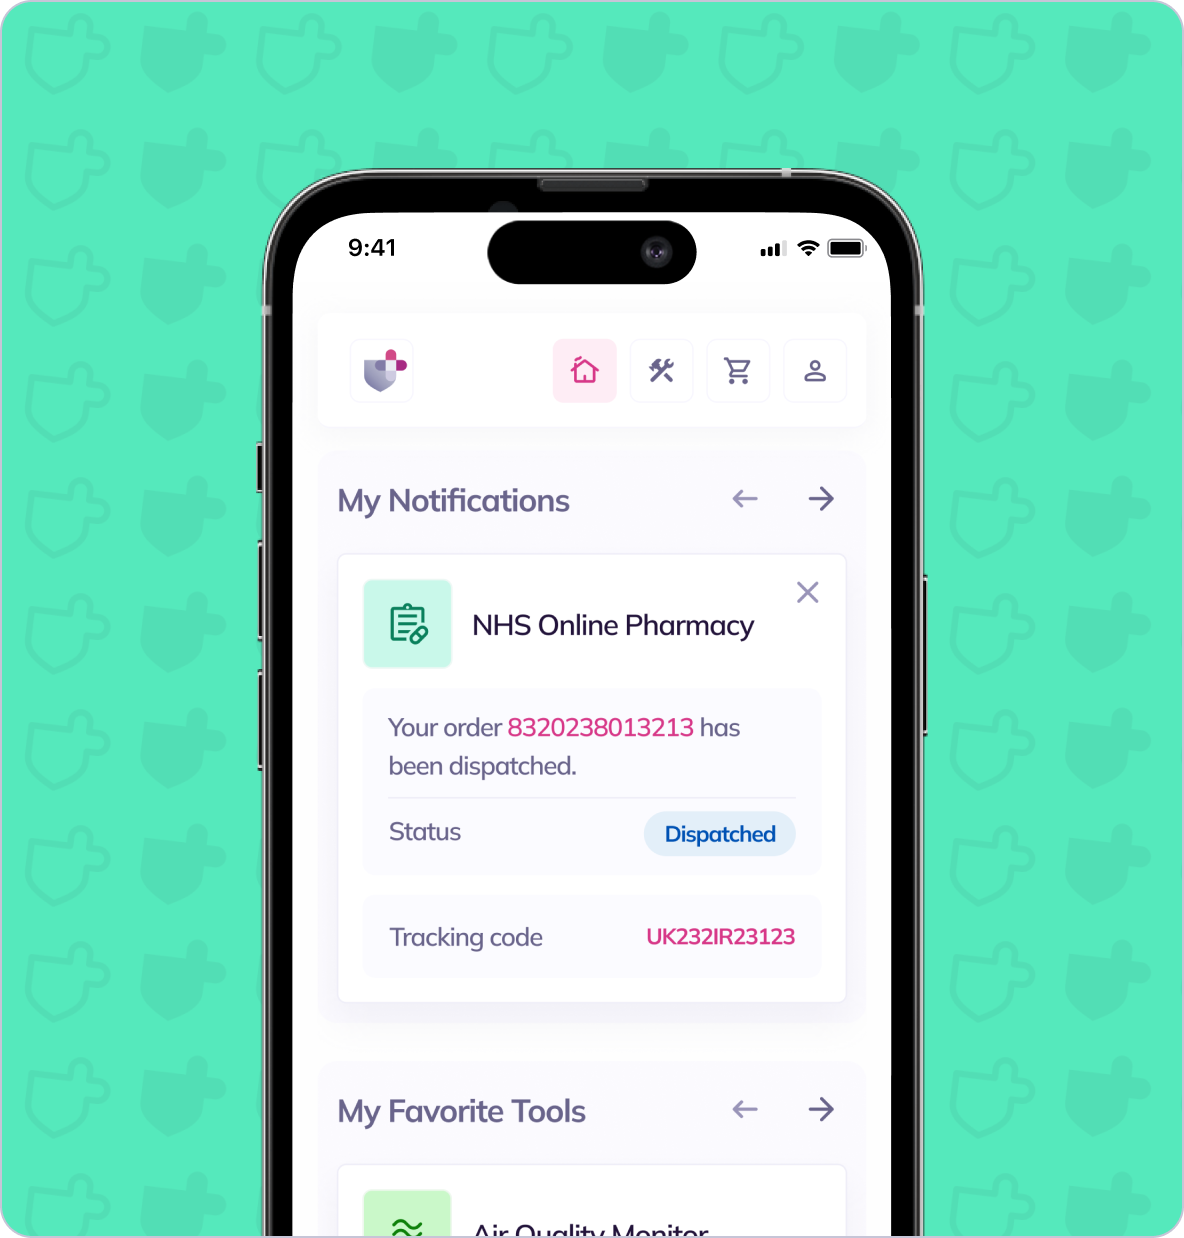 A screenshot of a phone displaying the convenient services of the NHS Online Pharmacy.